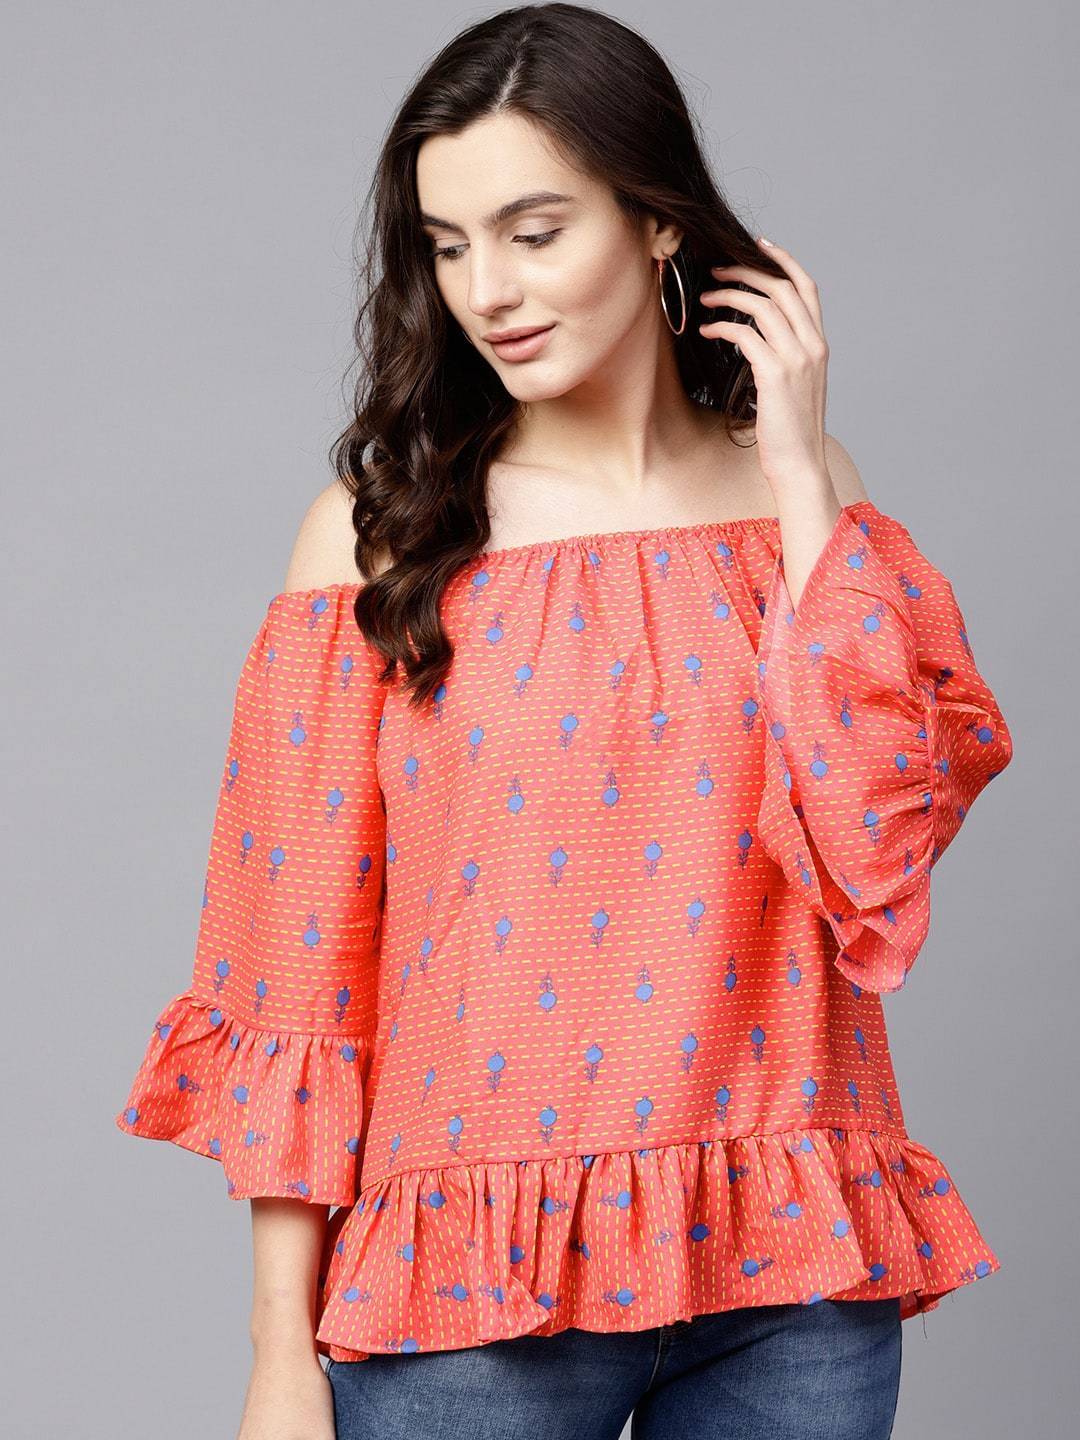 Women's Quirky Off Shoulder Top - Pannkh